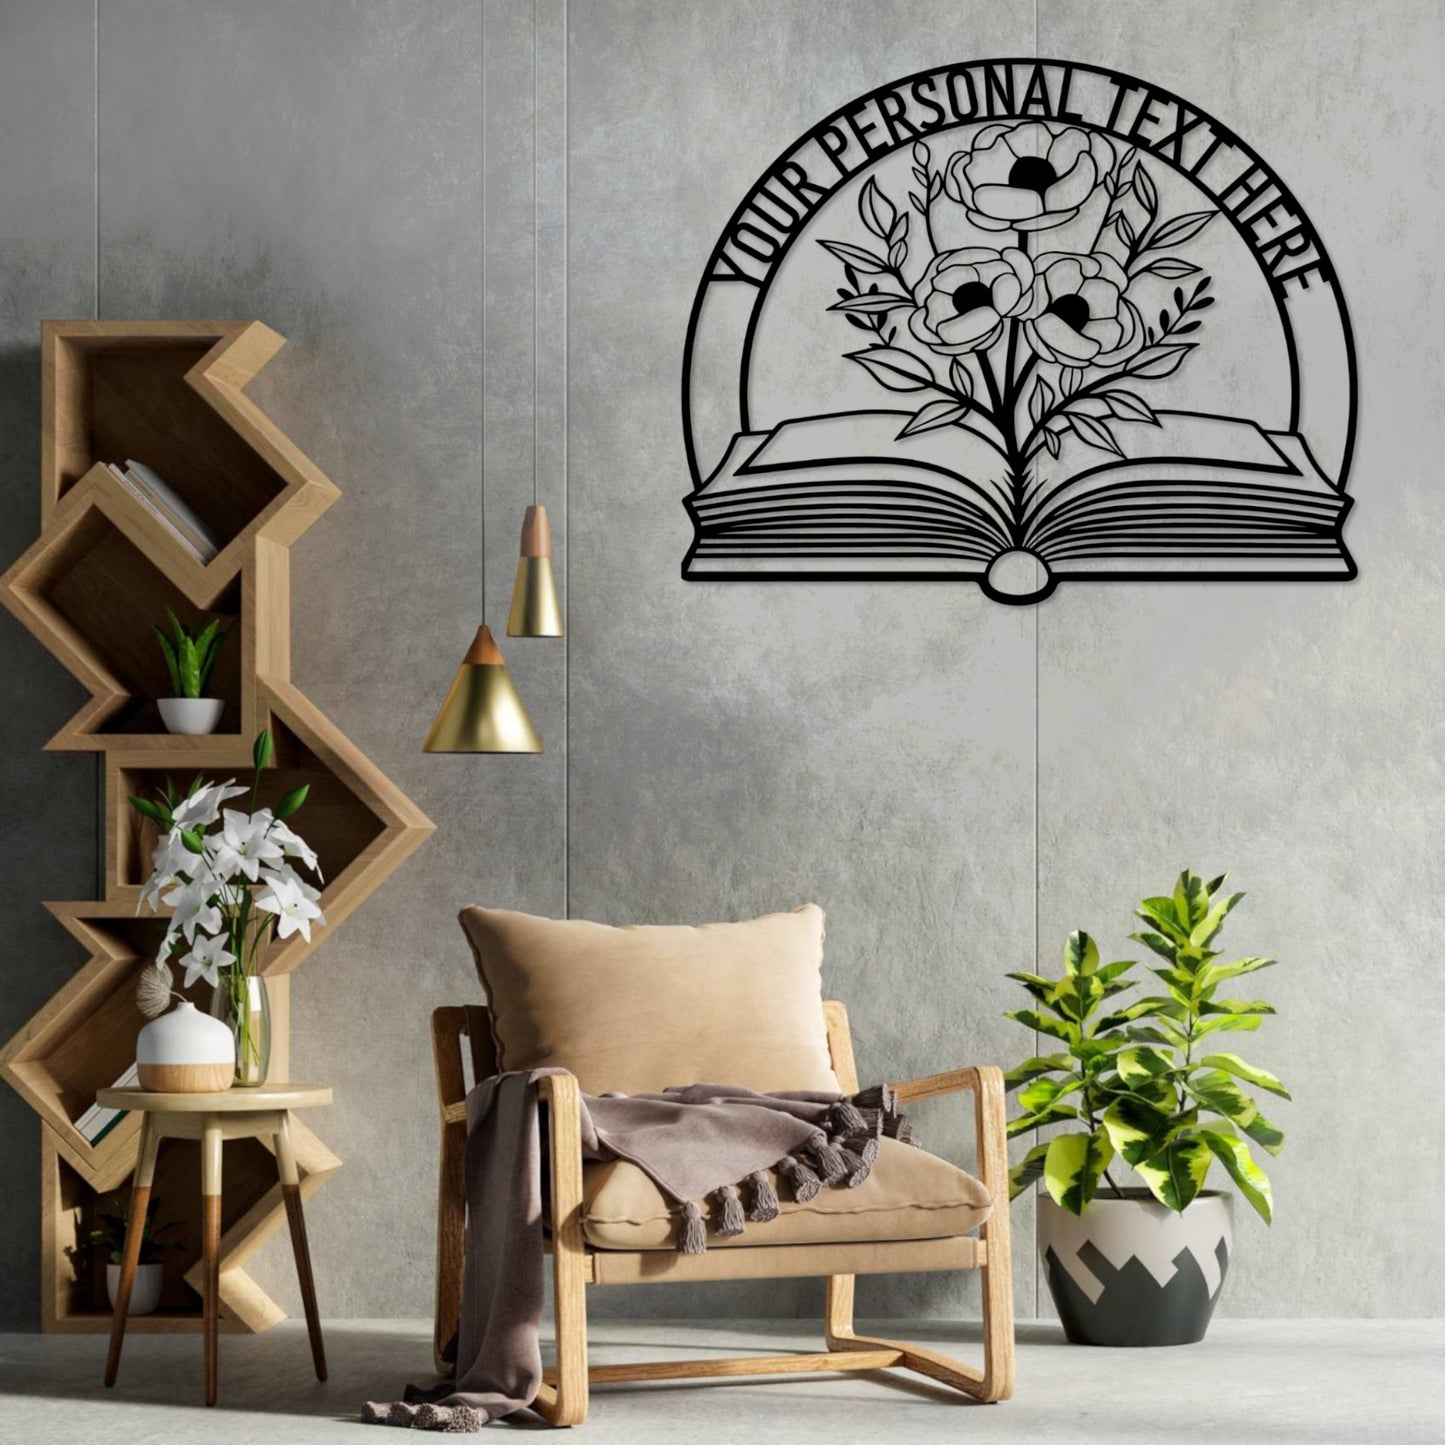 Personalized Reading Room Name Metal Sign. Custom Book Lover Wall Decor Gift. Home Library Wall Hanging. Customized Bookworm Steel Sign Gift